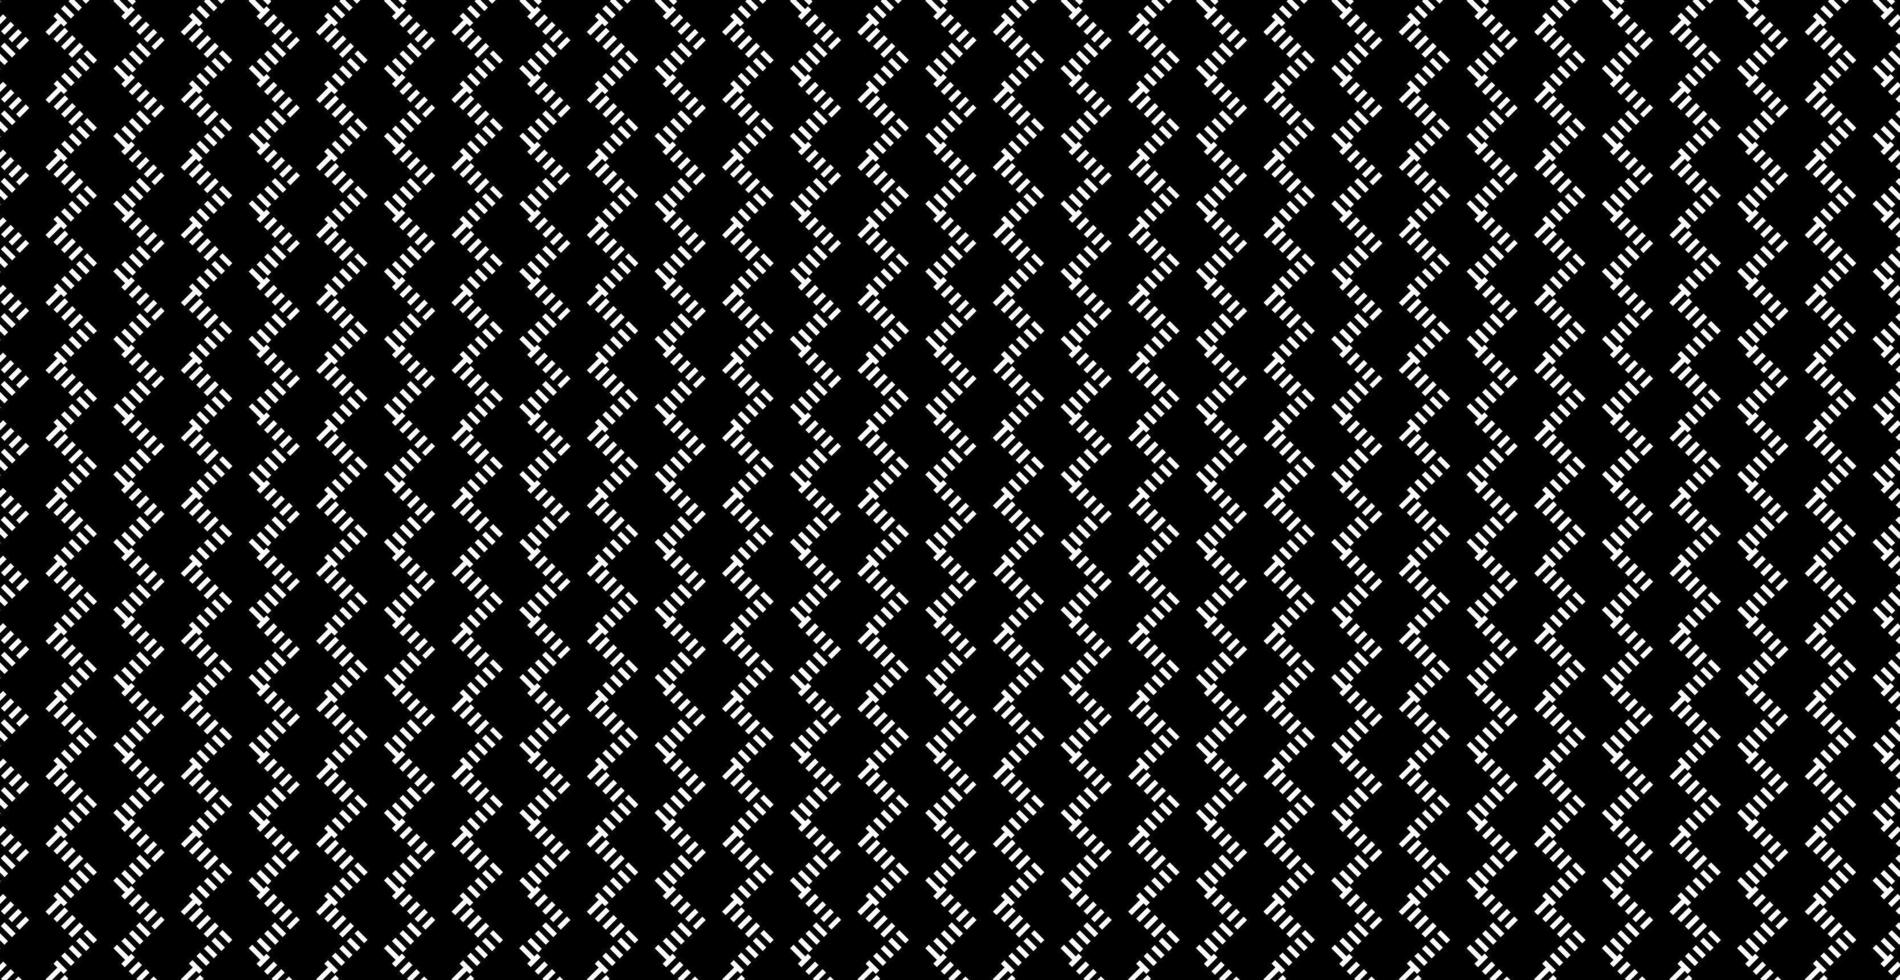 Panoramic black wicker background, repeating elements - Vector